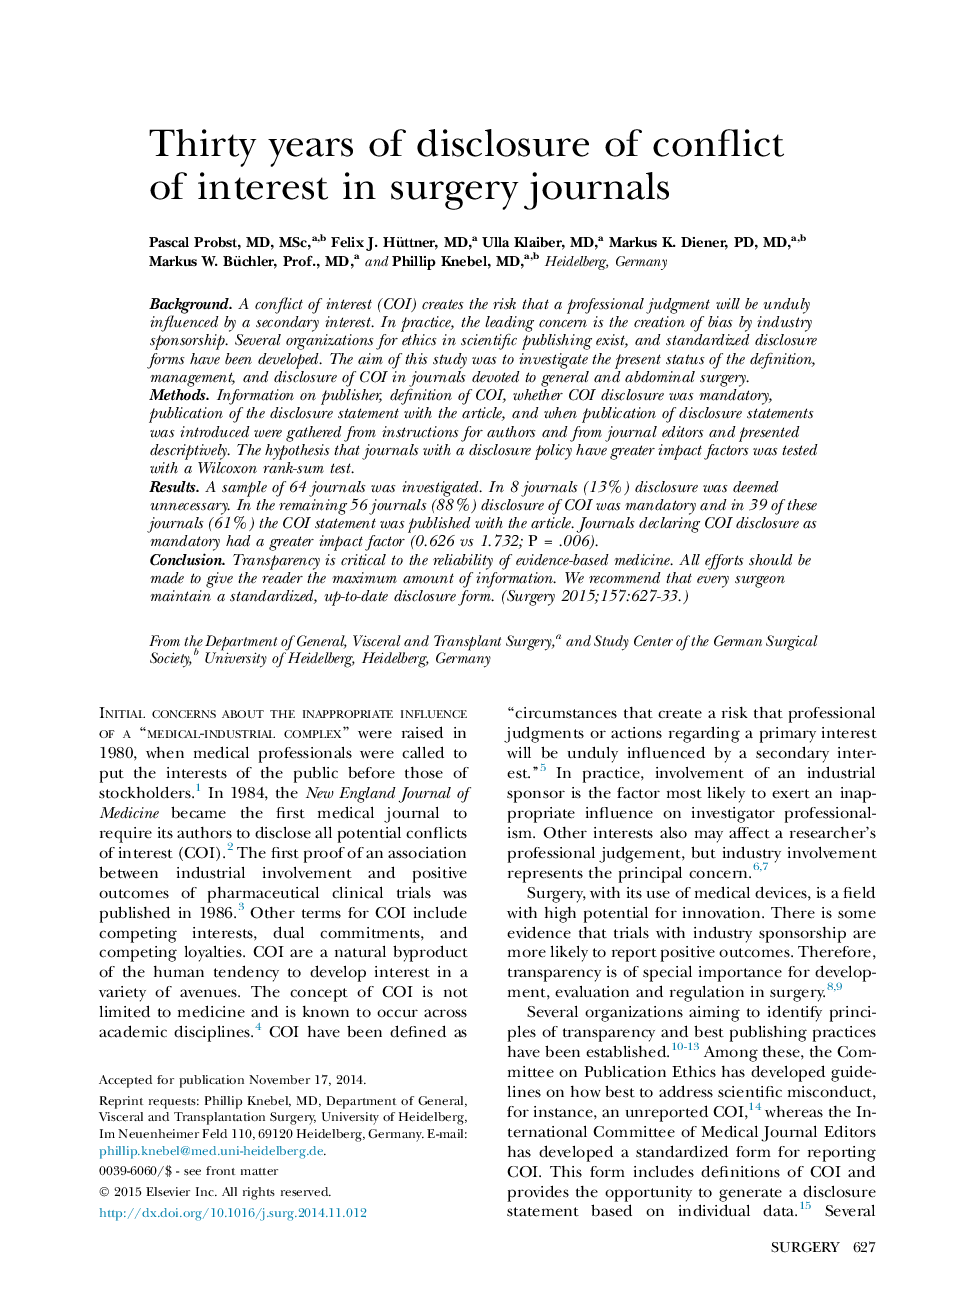 Thirty years of disclosure of conflict of interest in surgery journals